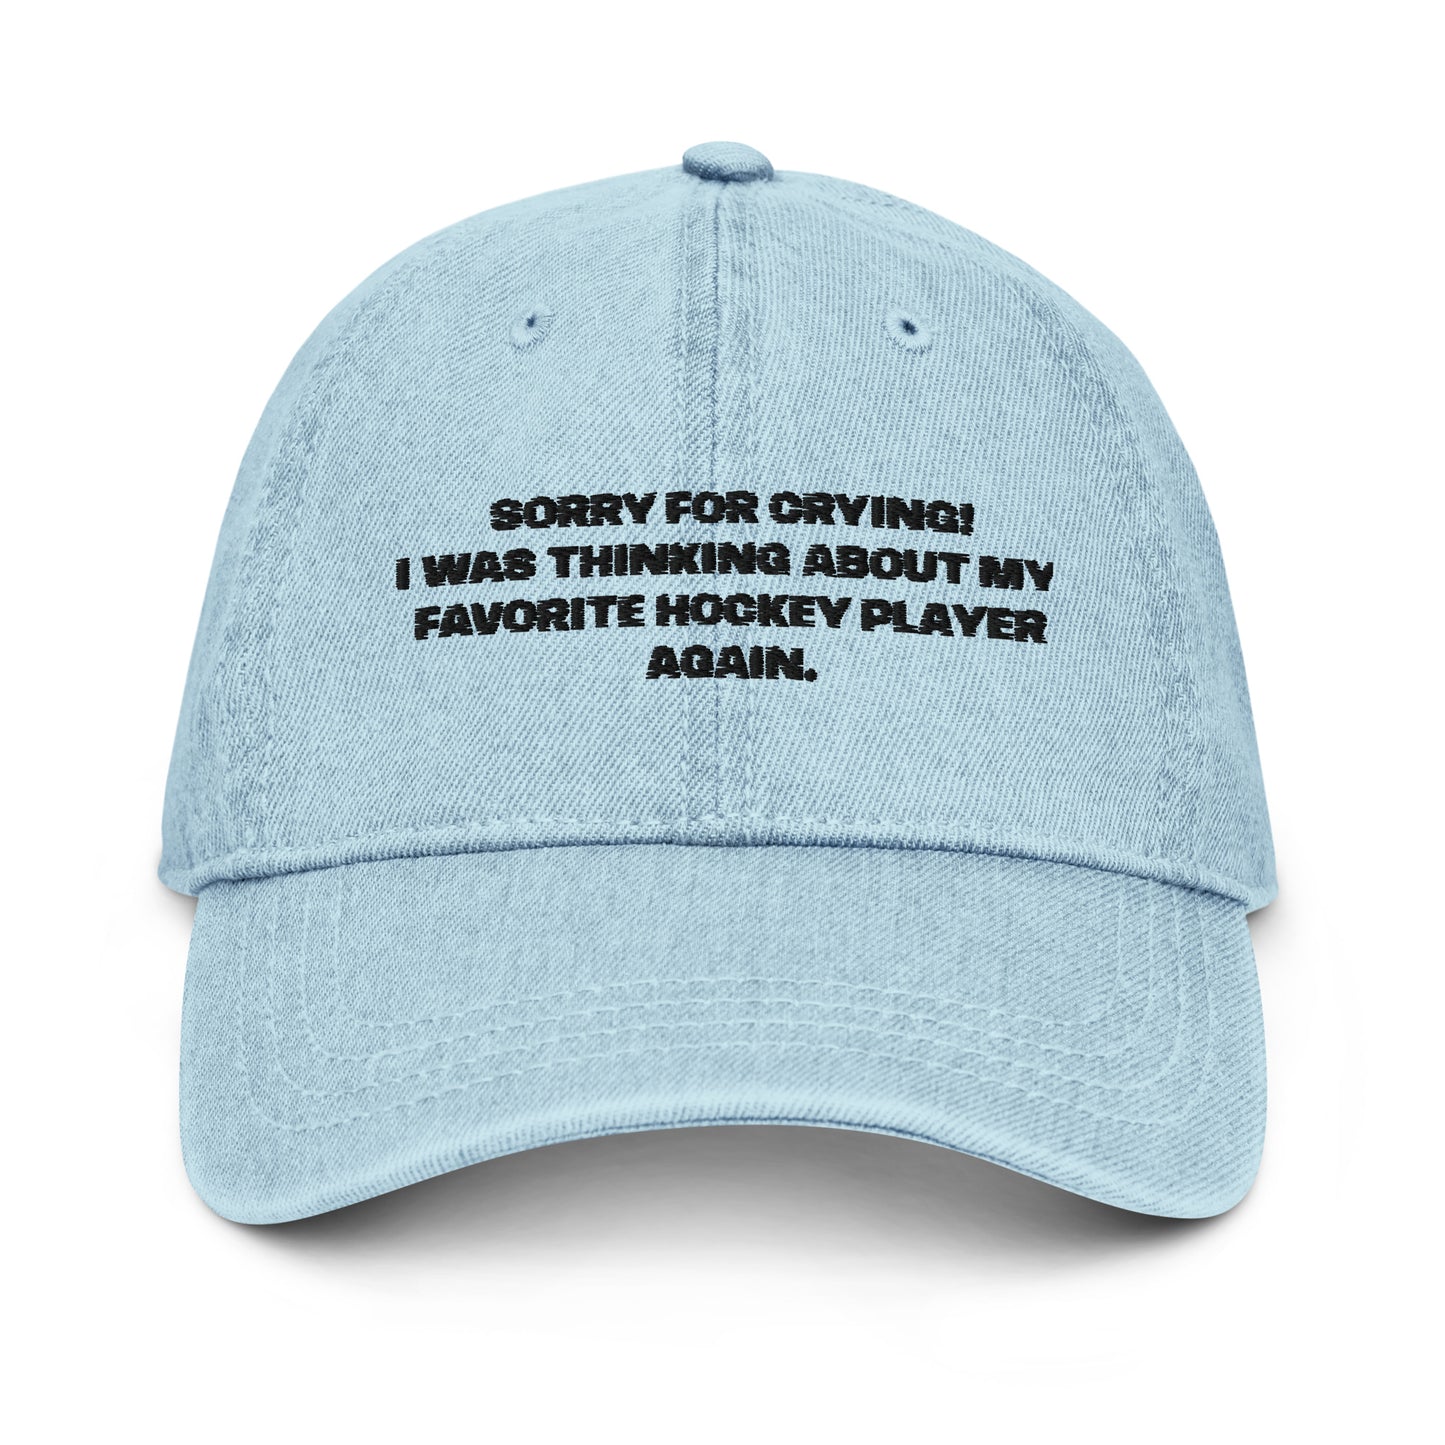 SORRY FOR CRYING DENIM DAD HAT